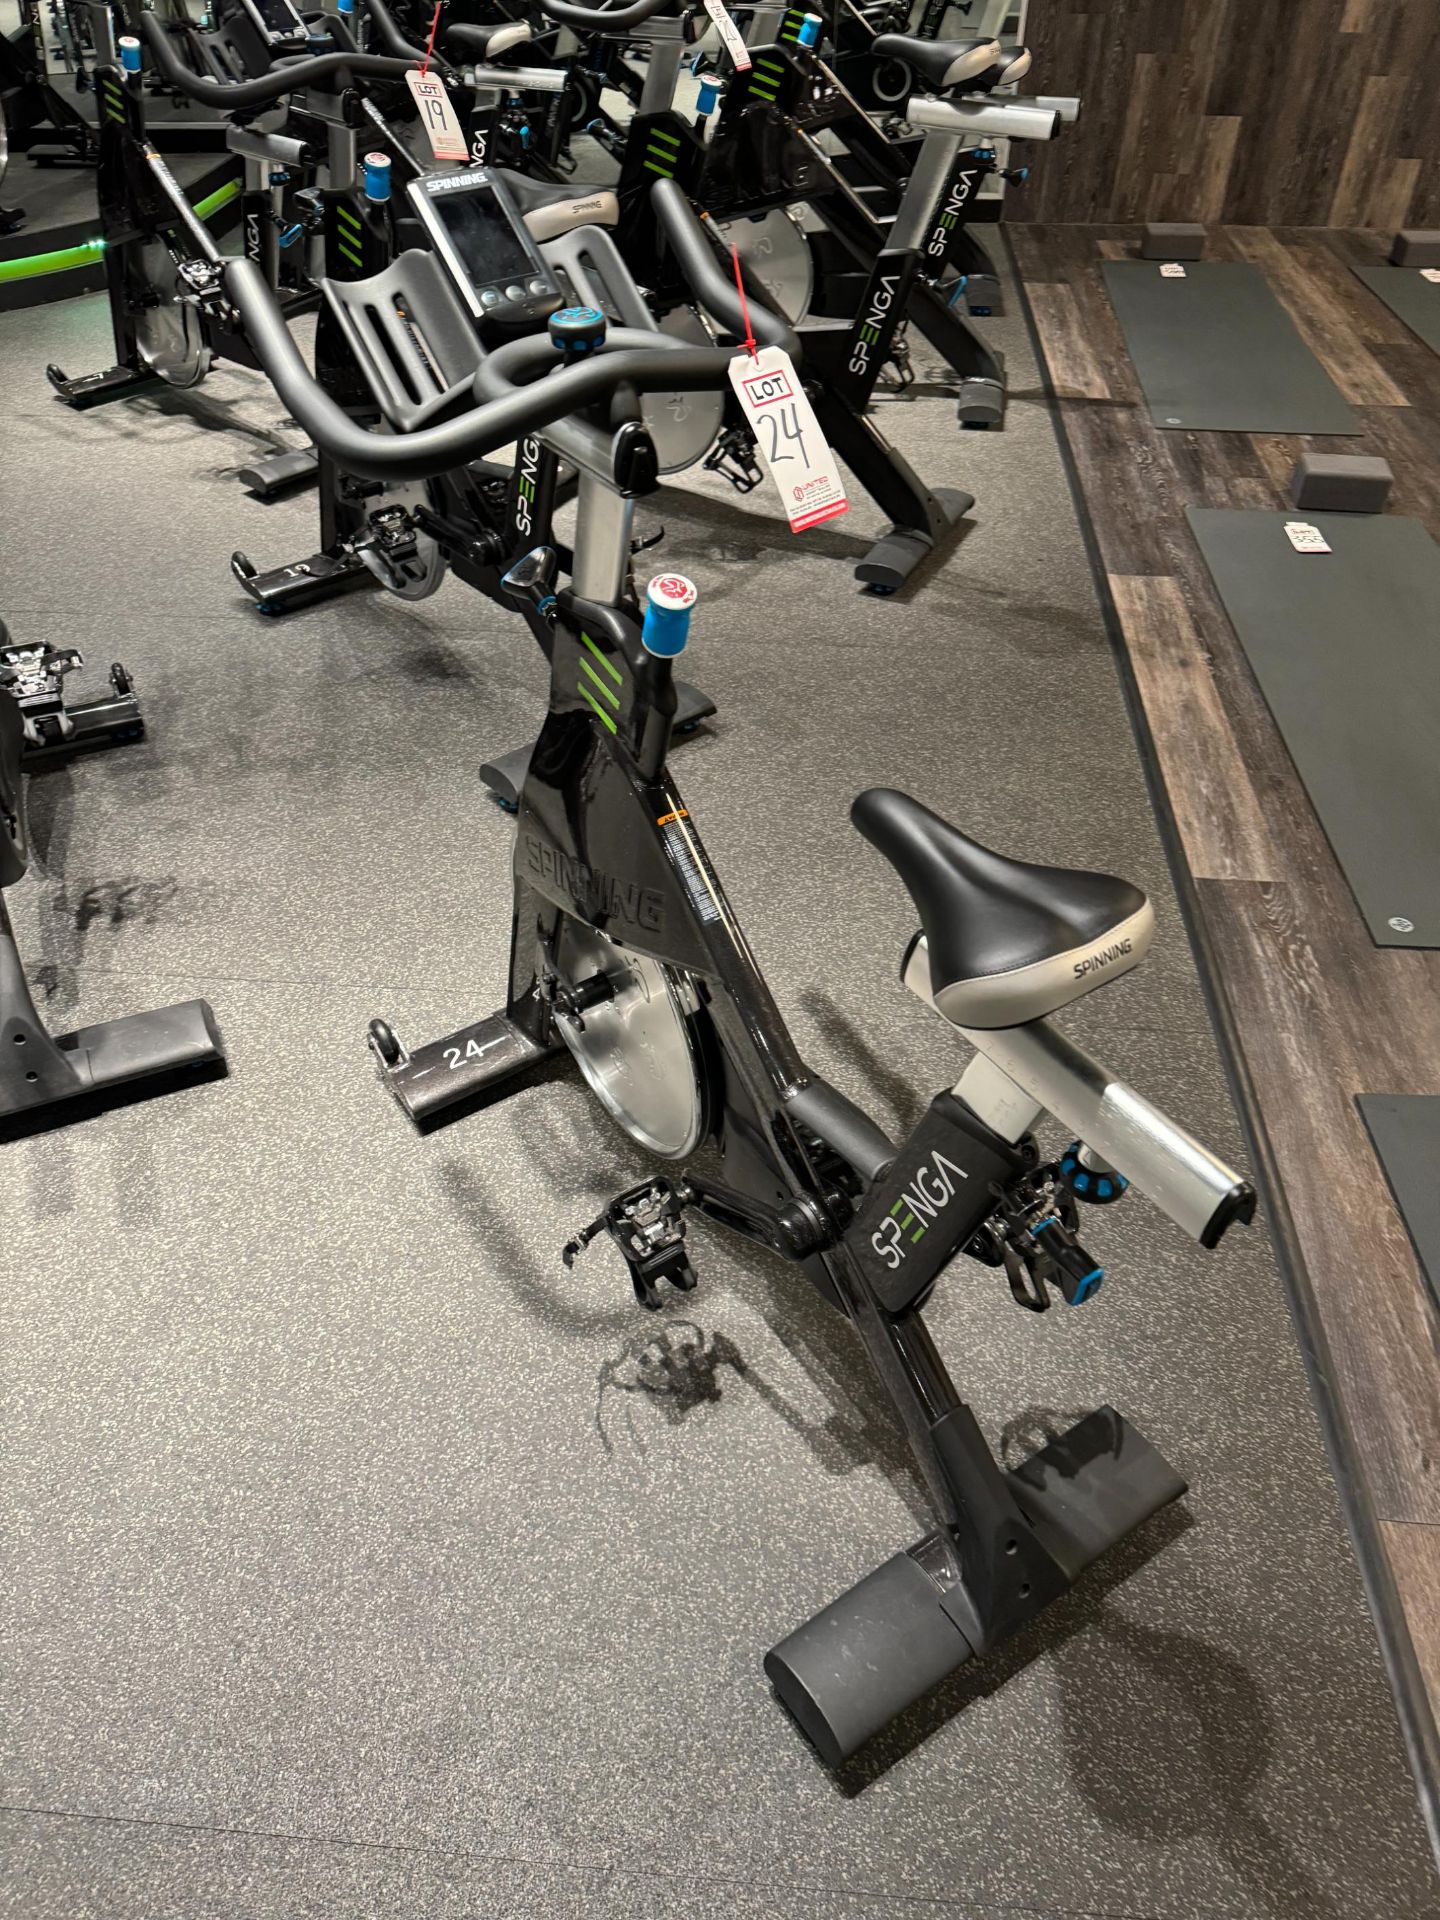 PRECOR SBK 869 SPINNER CHRONO POWER BIKE, W/ CONSOLE, S/N AC97I20190206, (NOTE: SOLD SUBJECT TO BULK